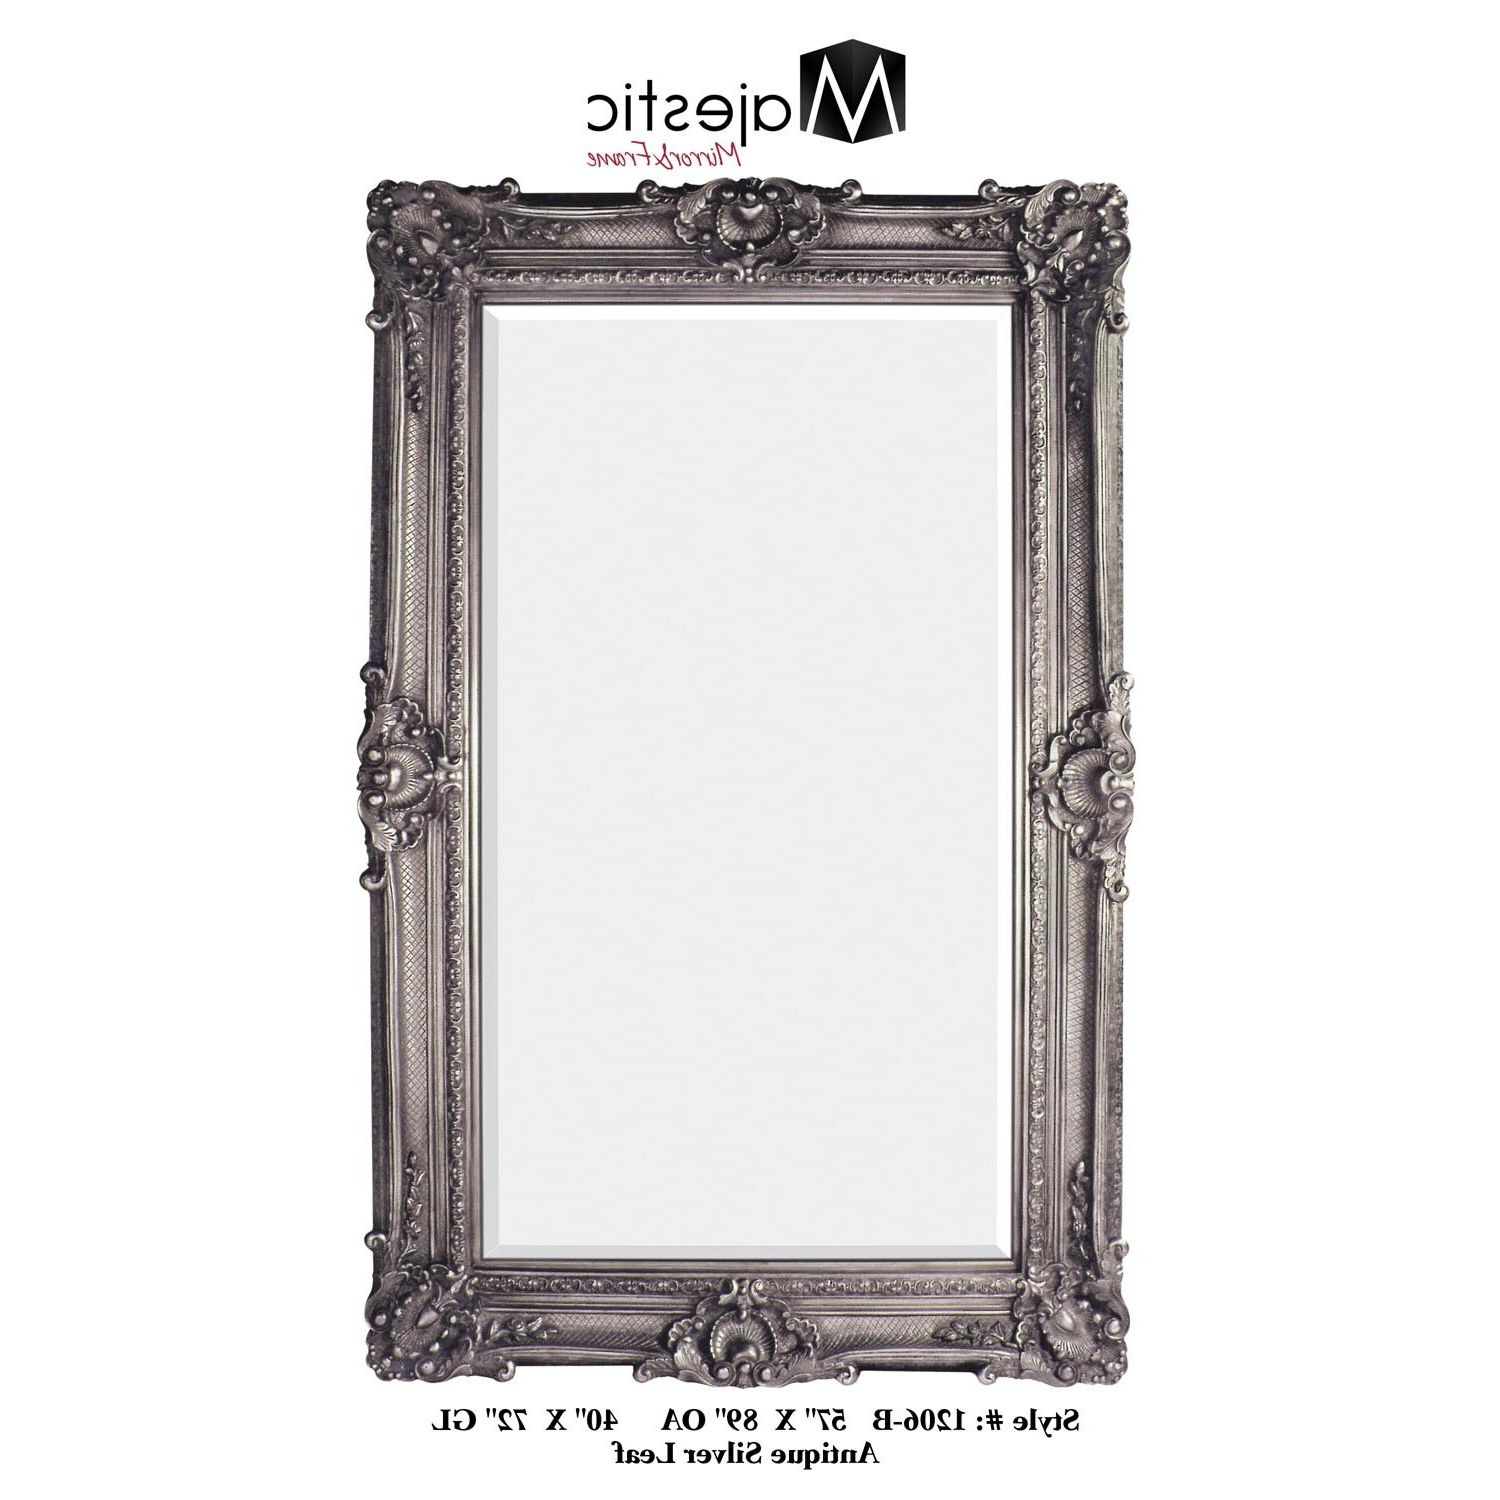 2020 Metallic Gold Leaf Wall Mirrors Throughout Majestic Mirror Antique Silver Leaf Finish Traditional Framed Beveled (View 12 of 15)